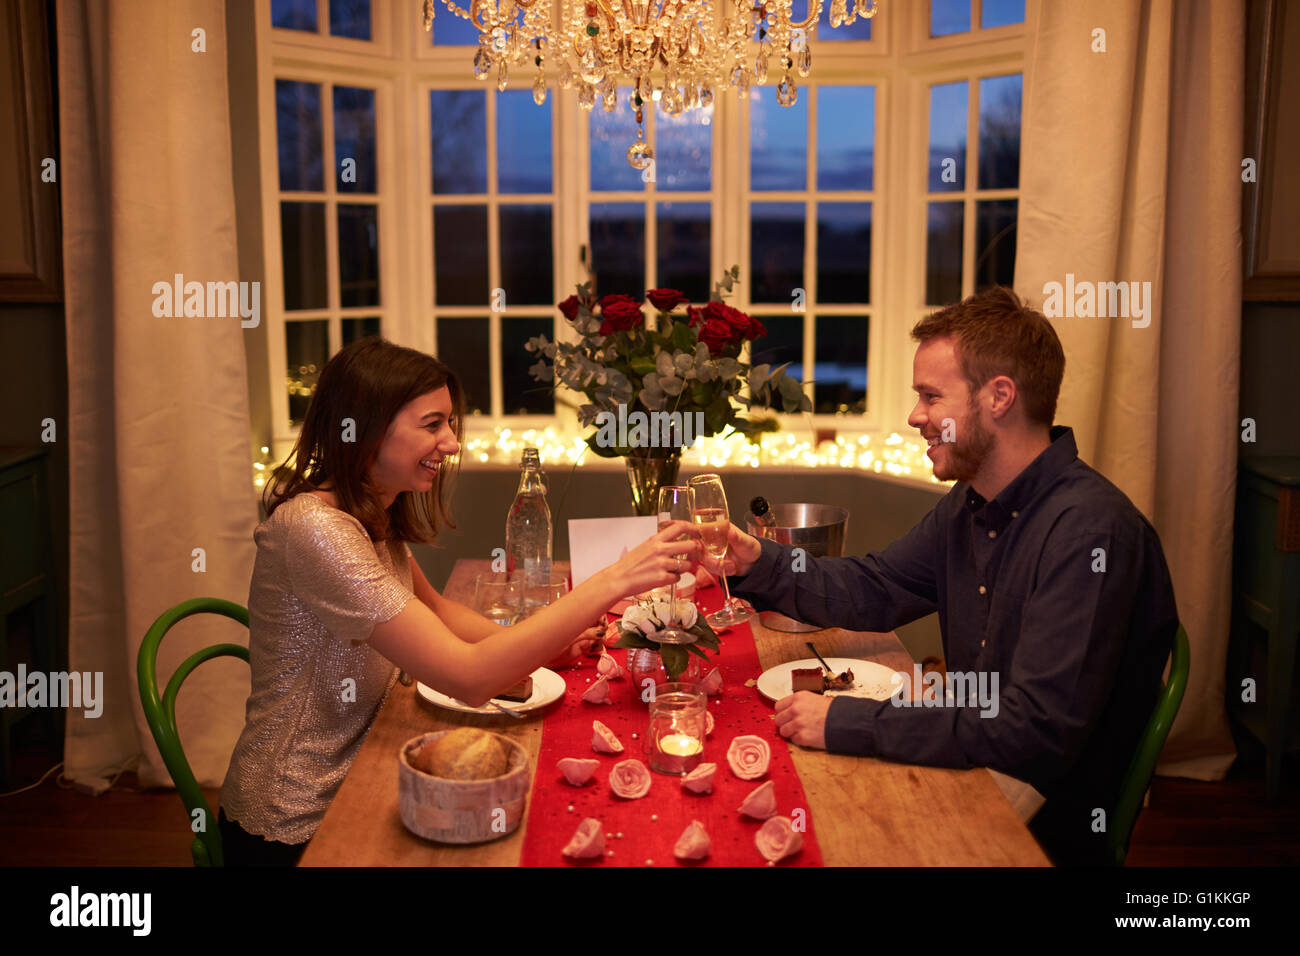 Romantic Couple Make A Toast At Valentines Day Meal Stock Photo